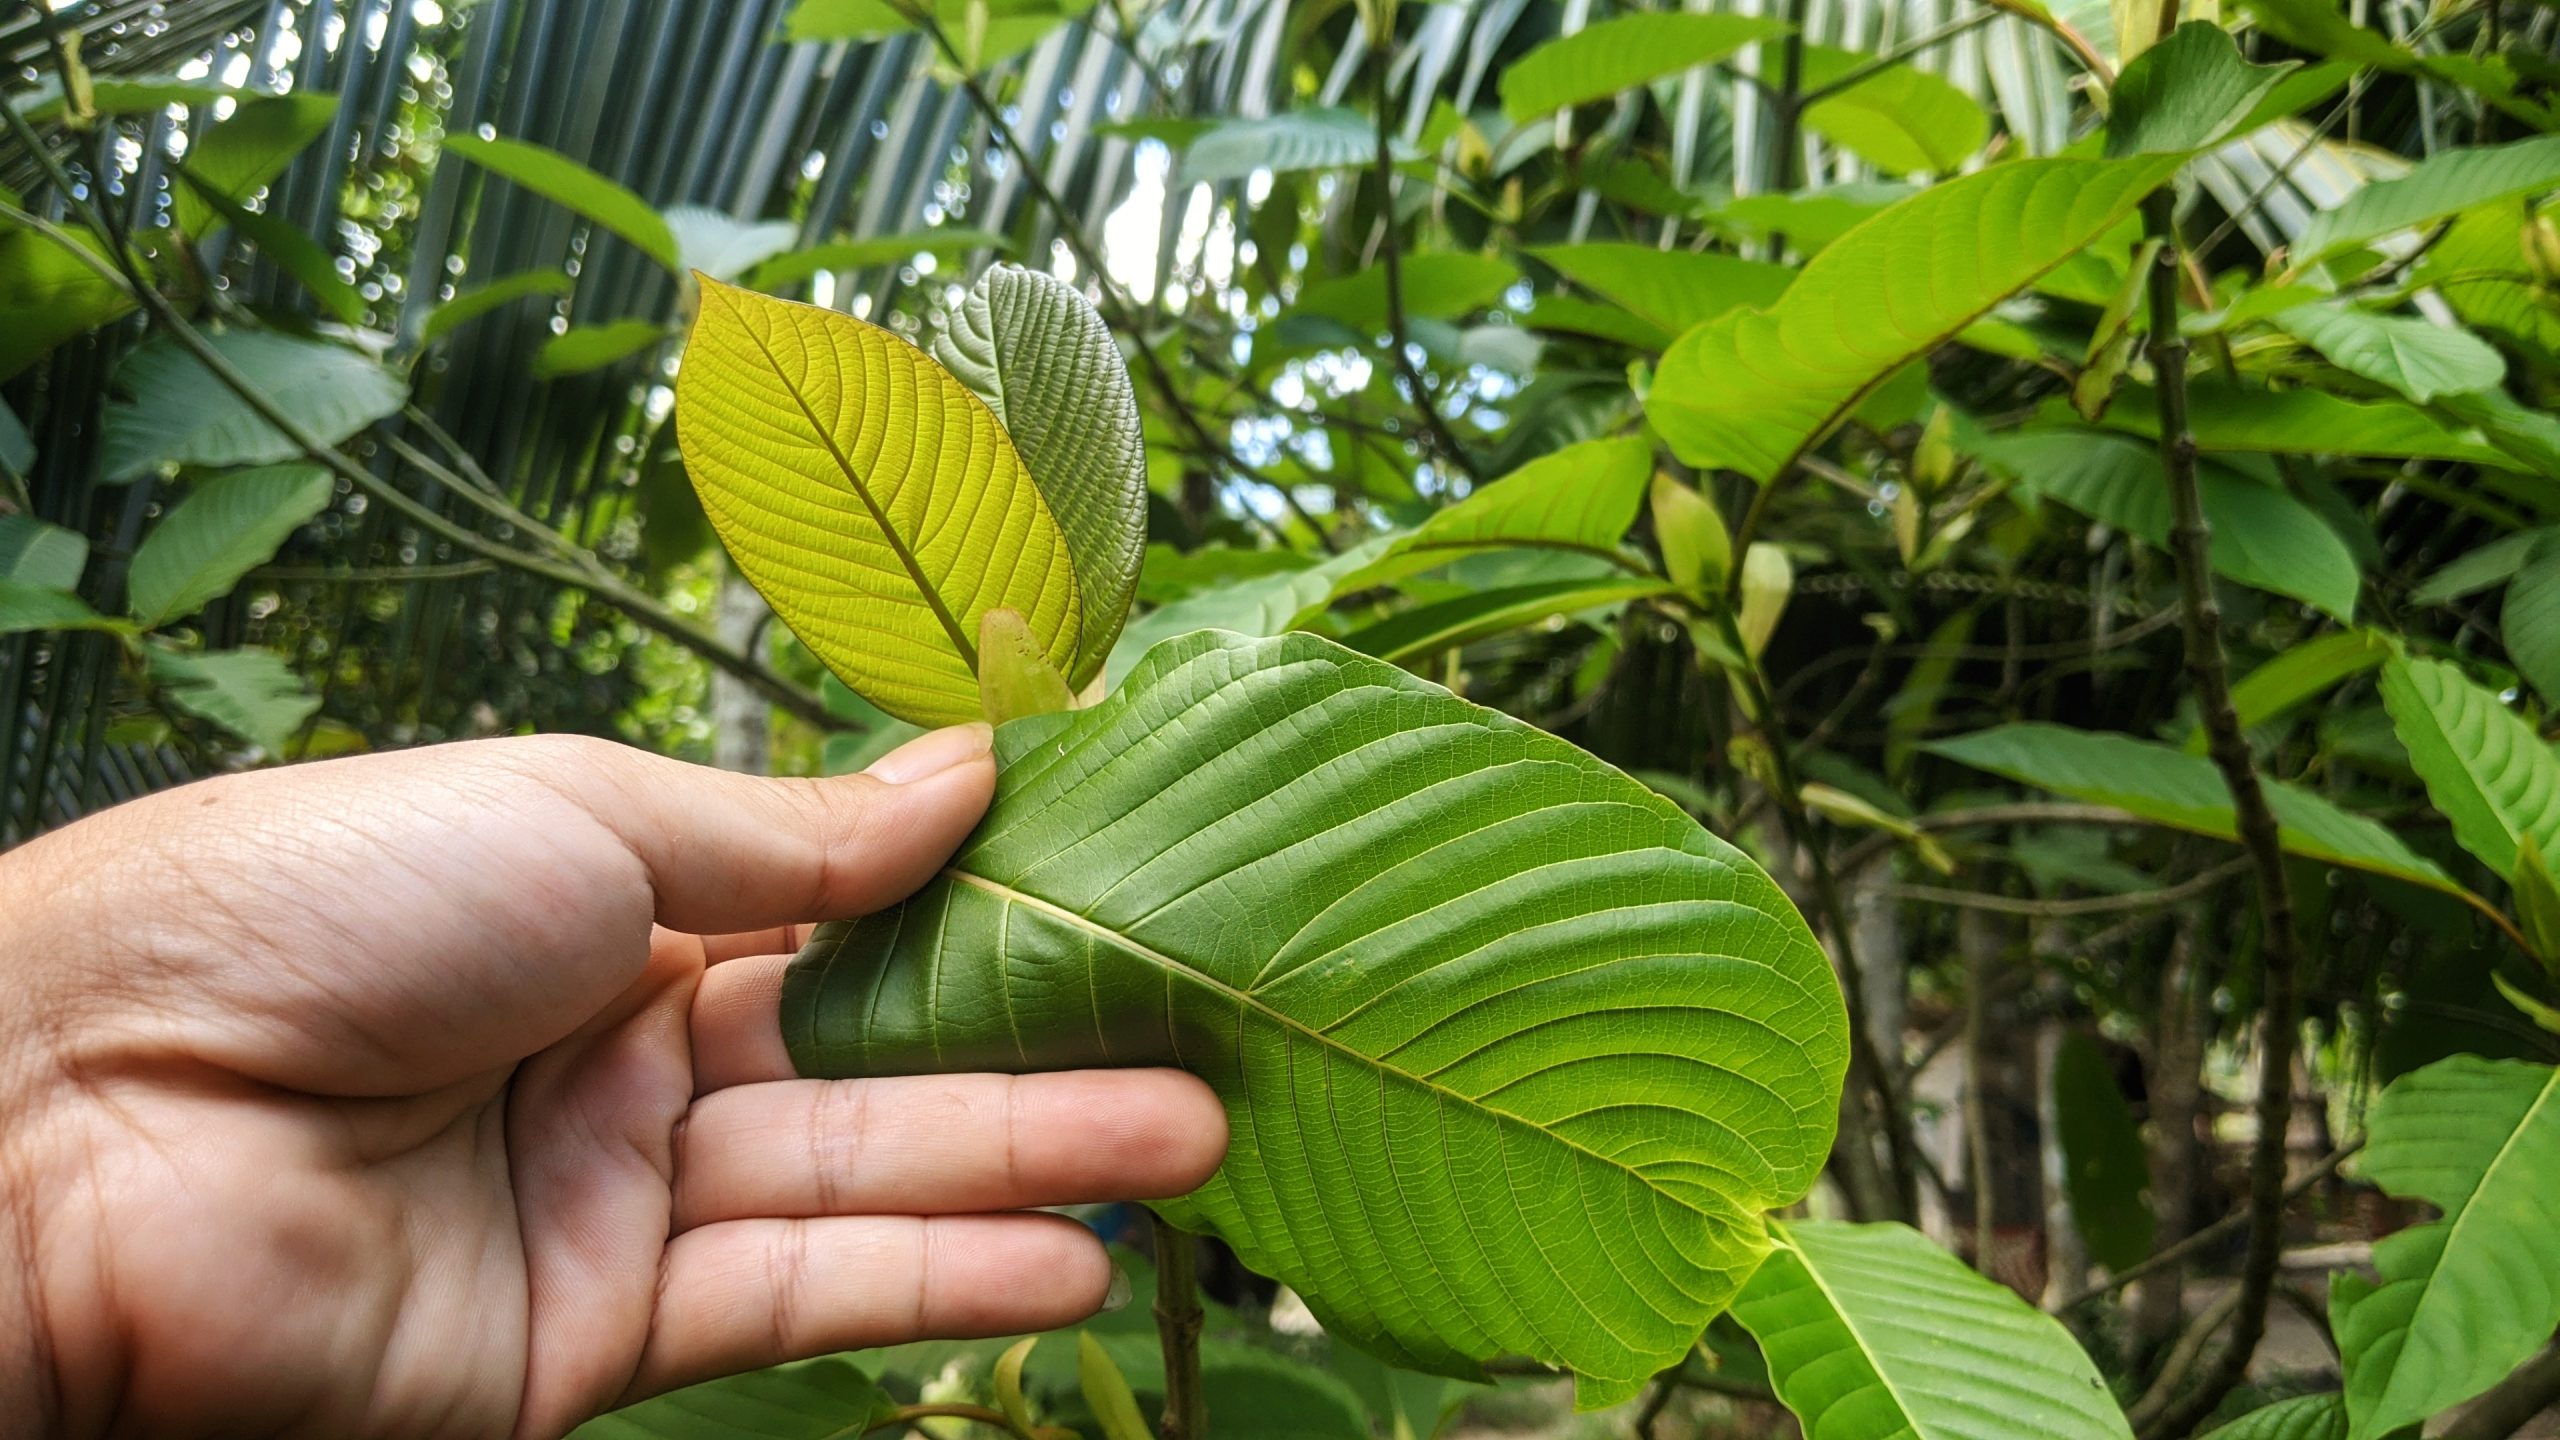 Photographic image of a kratom plant growing in a tropical forest. A human hand is reaching out to touch a leaf from the closest kratom plant.